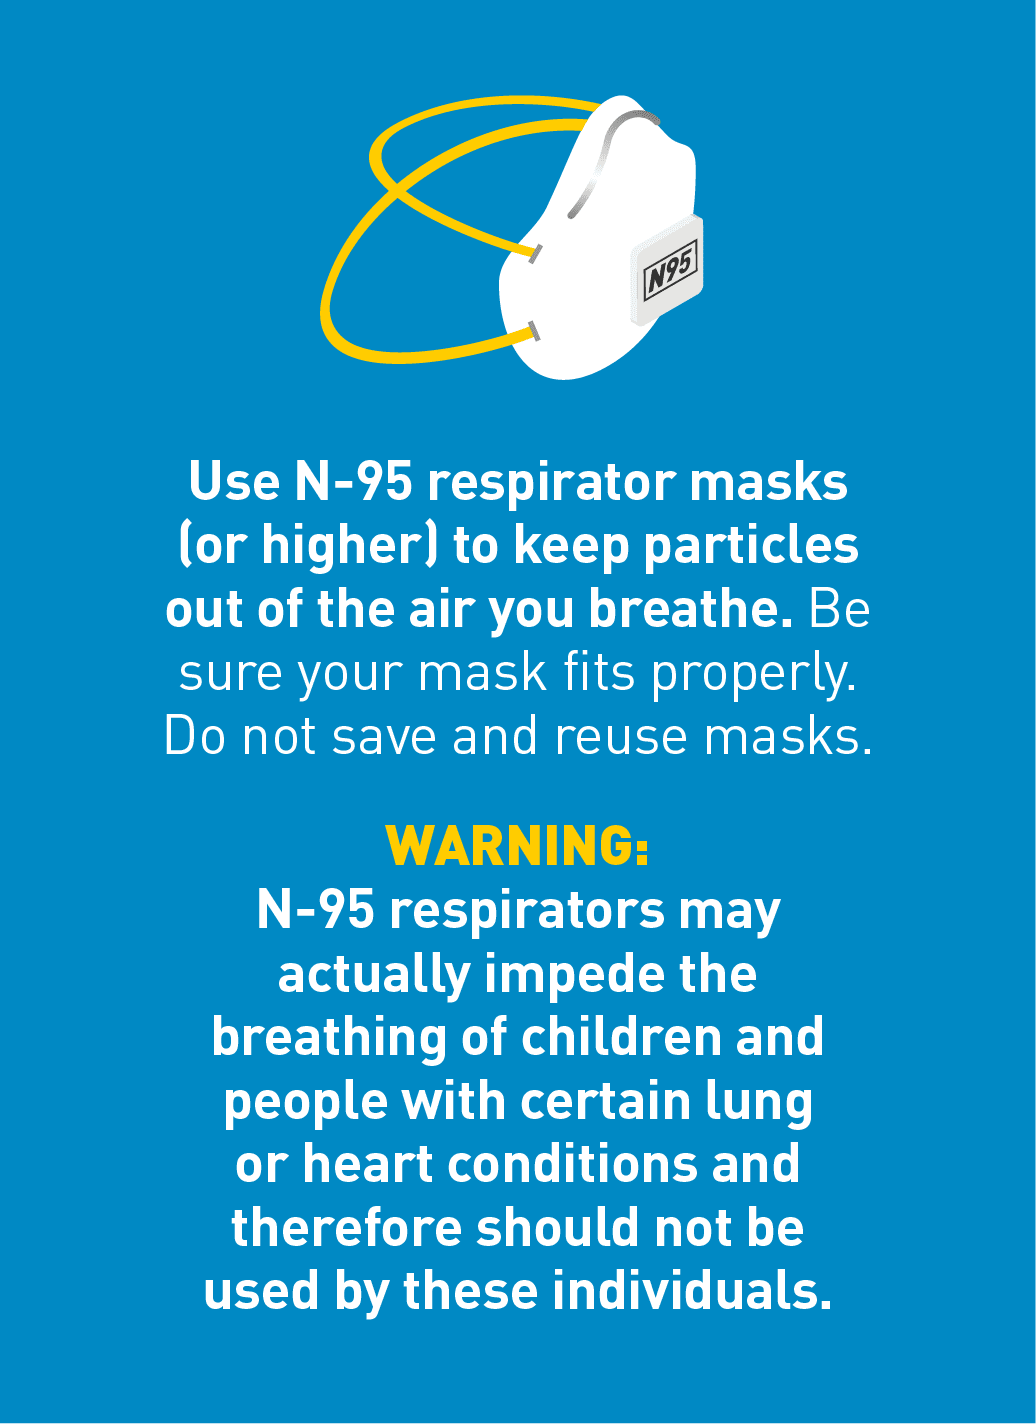 Use an N-95 respirator masks (or higher) to keep particles out of the air you breathe. Be sure your mask fits properly. Do not save and reuse masks.  WARNING: N-95 respirators may actually impede the breathing of children and people with certain lung or heart conditions and therefore should not be used by these individuals.